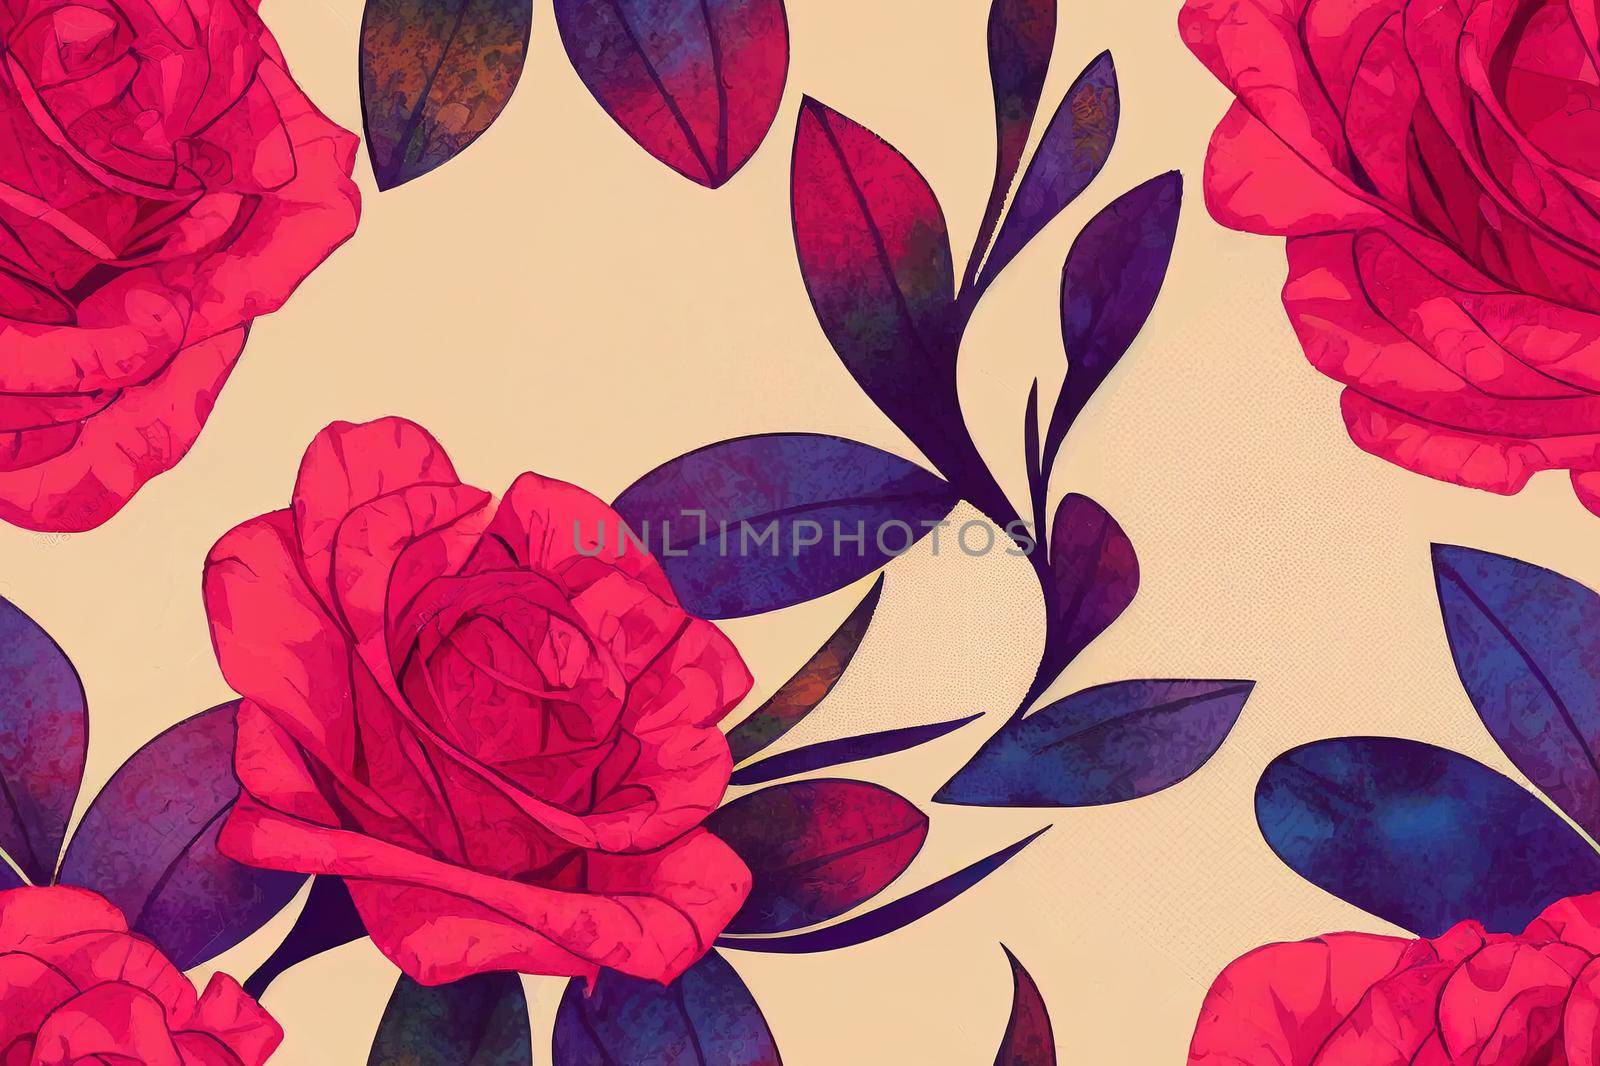 Seamless Geometric ethnic style pattern Manual composition with watercolor flowers roses, floral texture. Design for cover, fabric, textile, wrapping paper